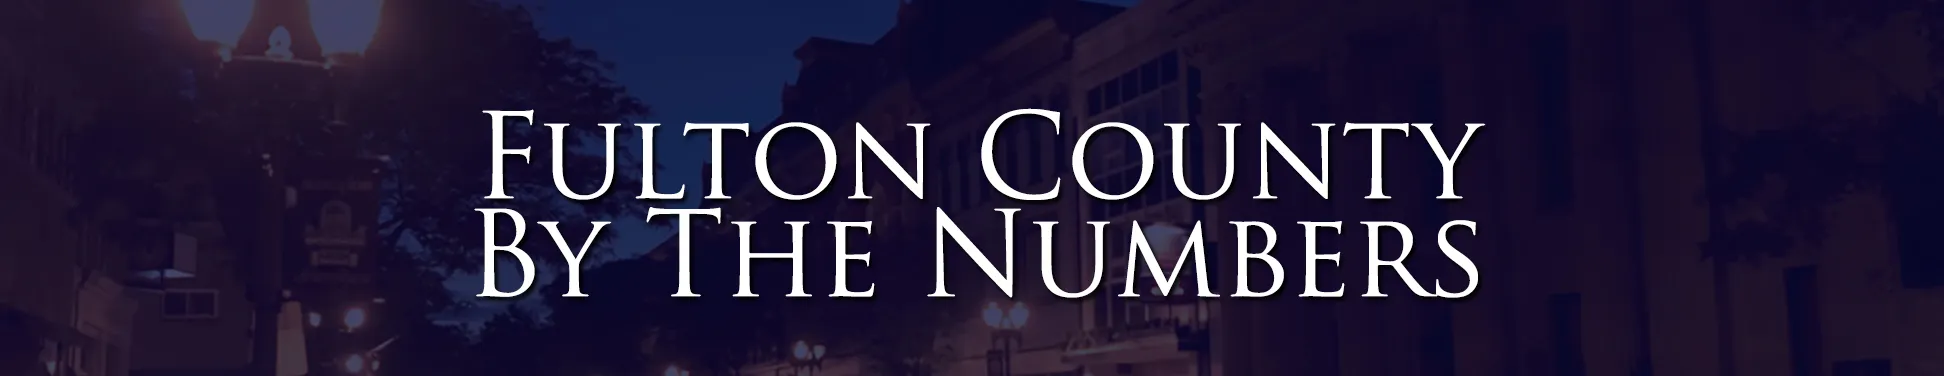 Fulton County By The Numbers